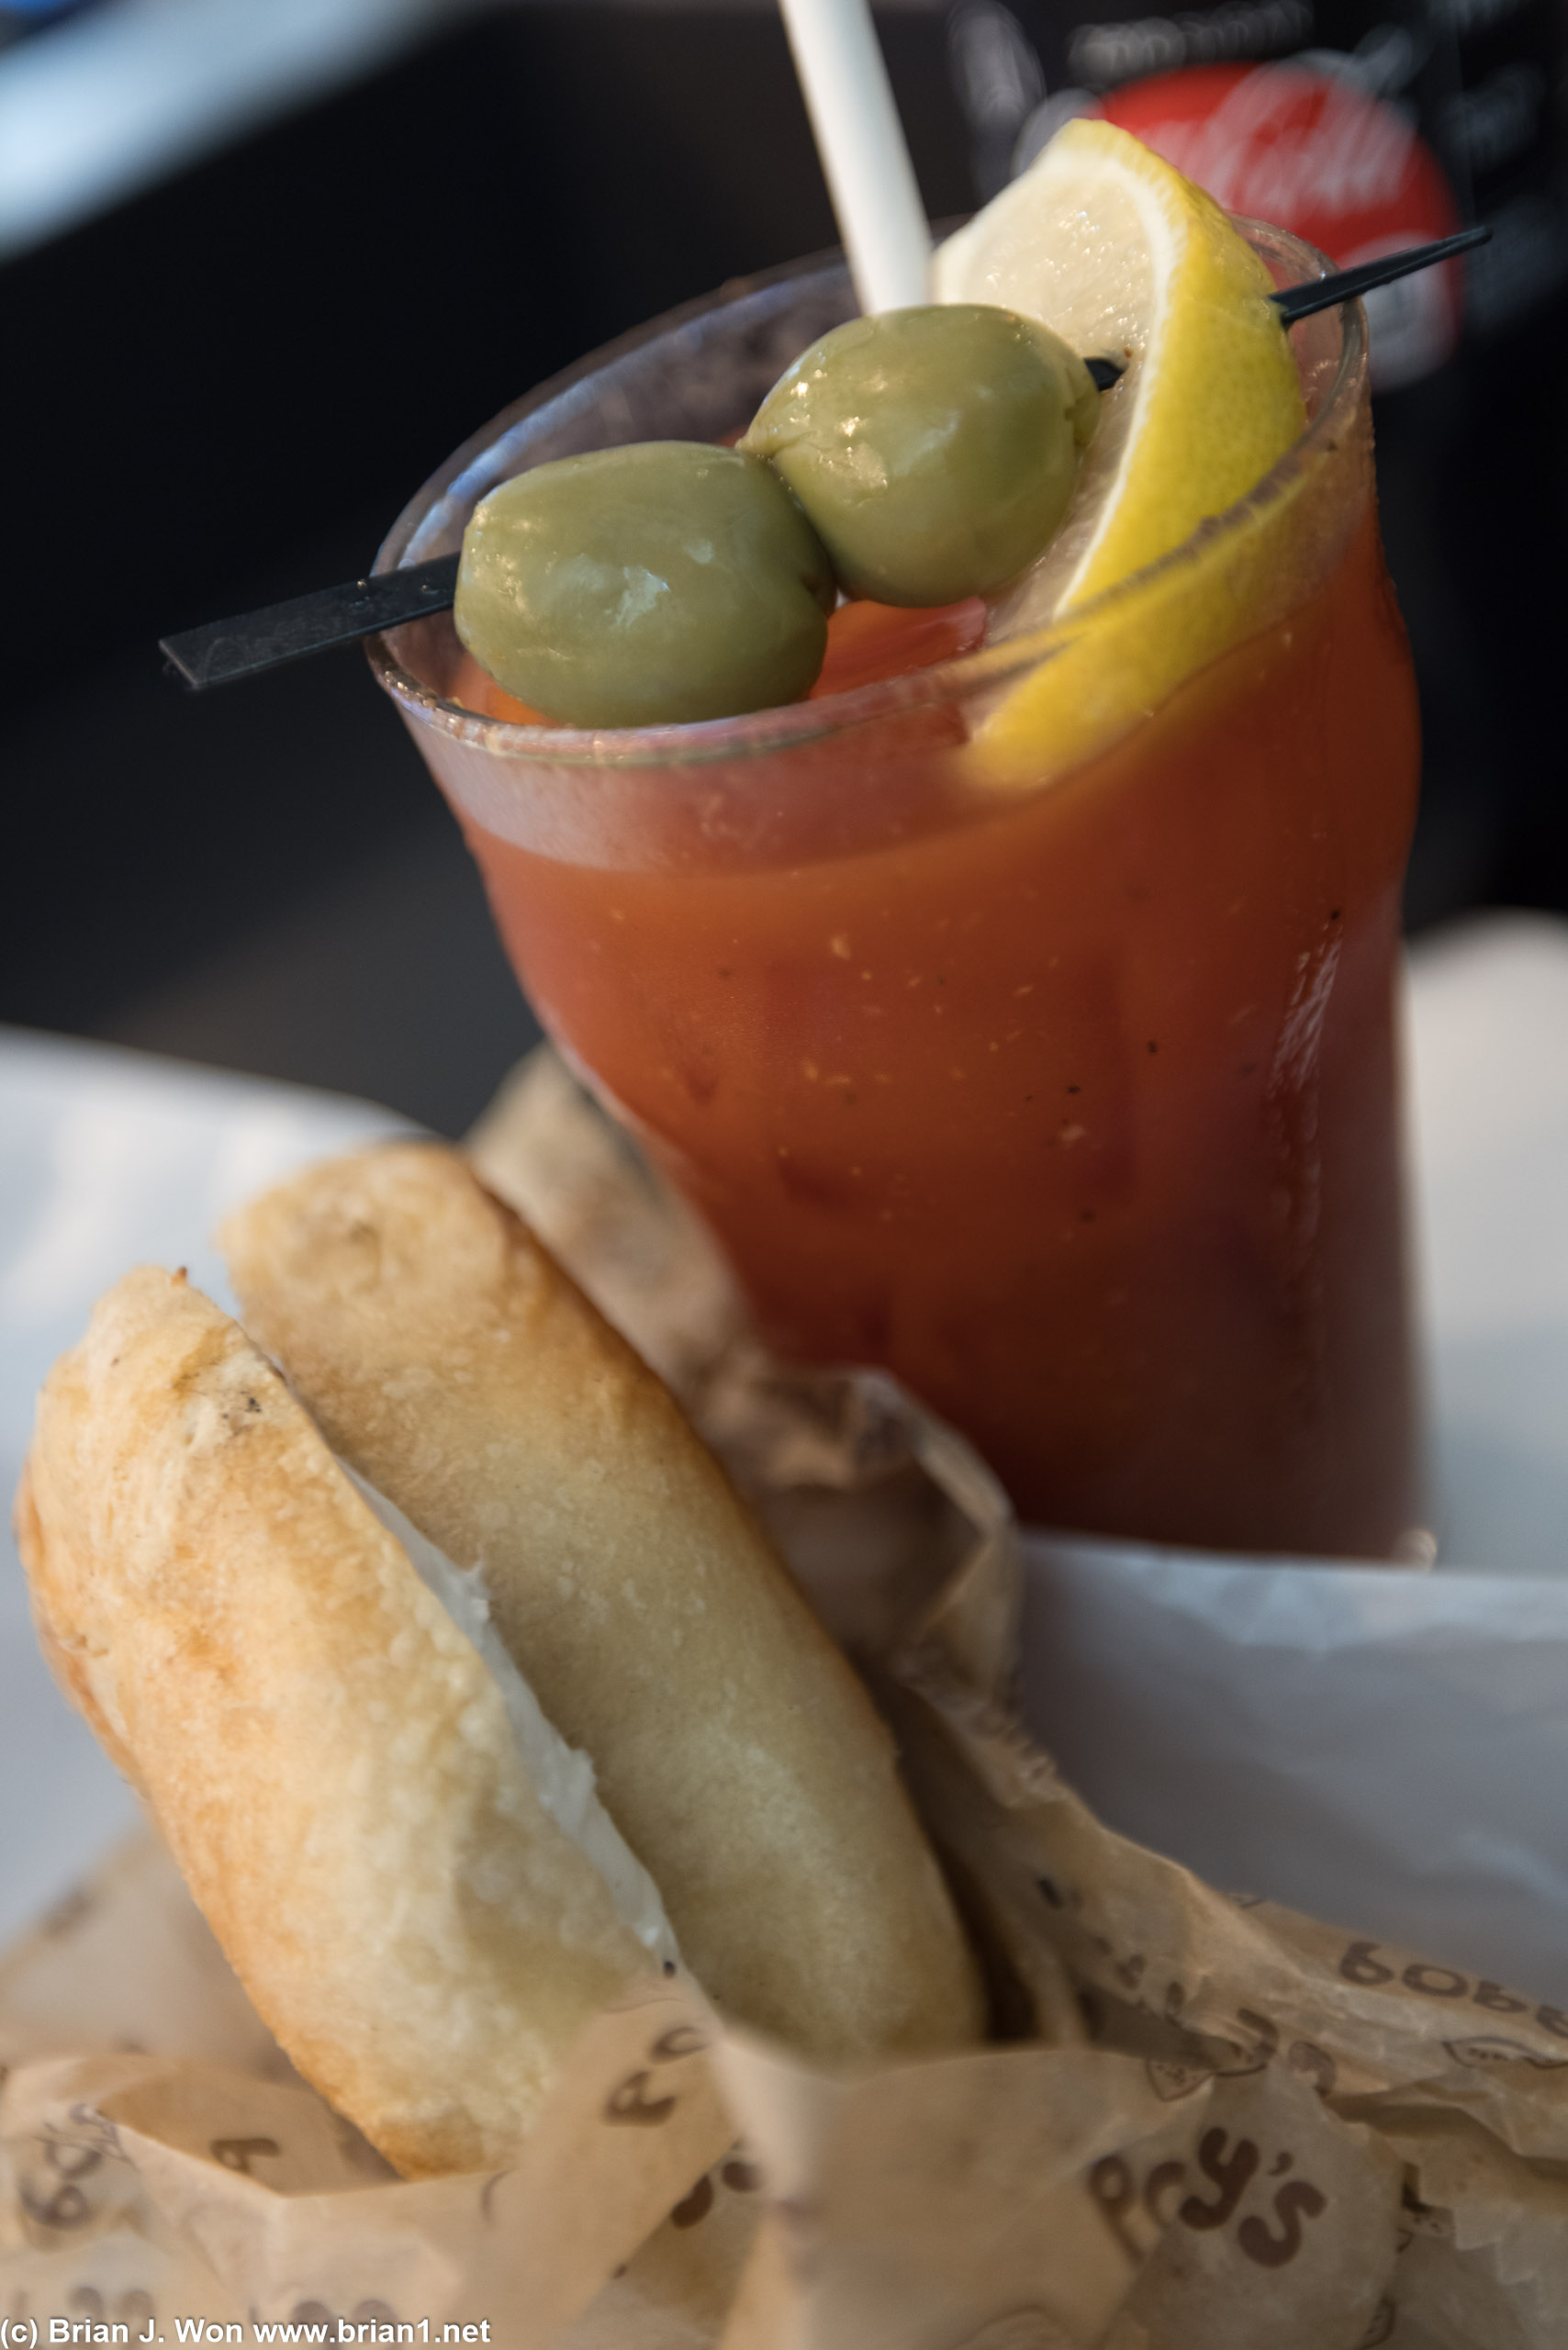 Poppy's bagel and a very, very overpriced bloody mary from Wanderlust.